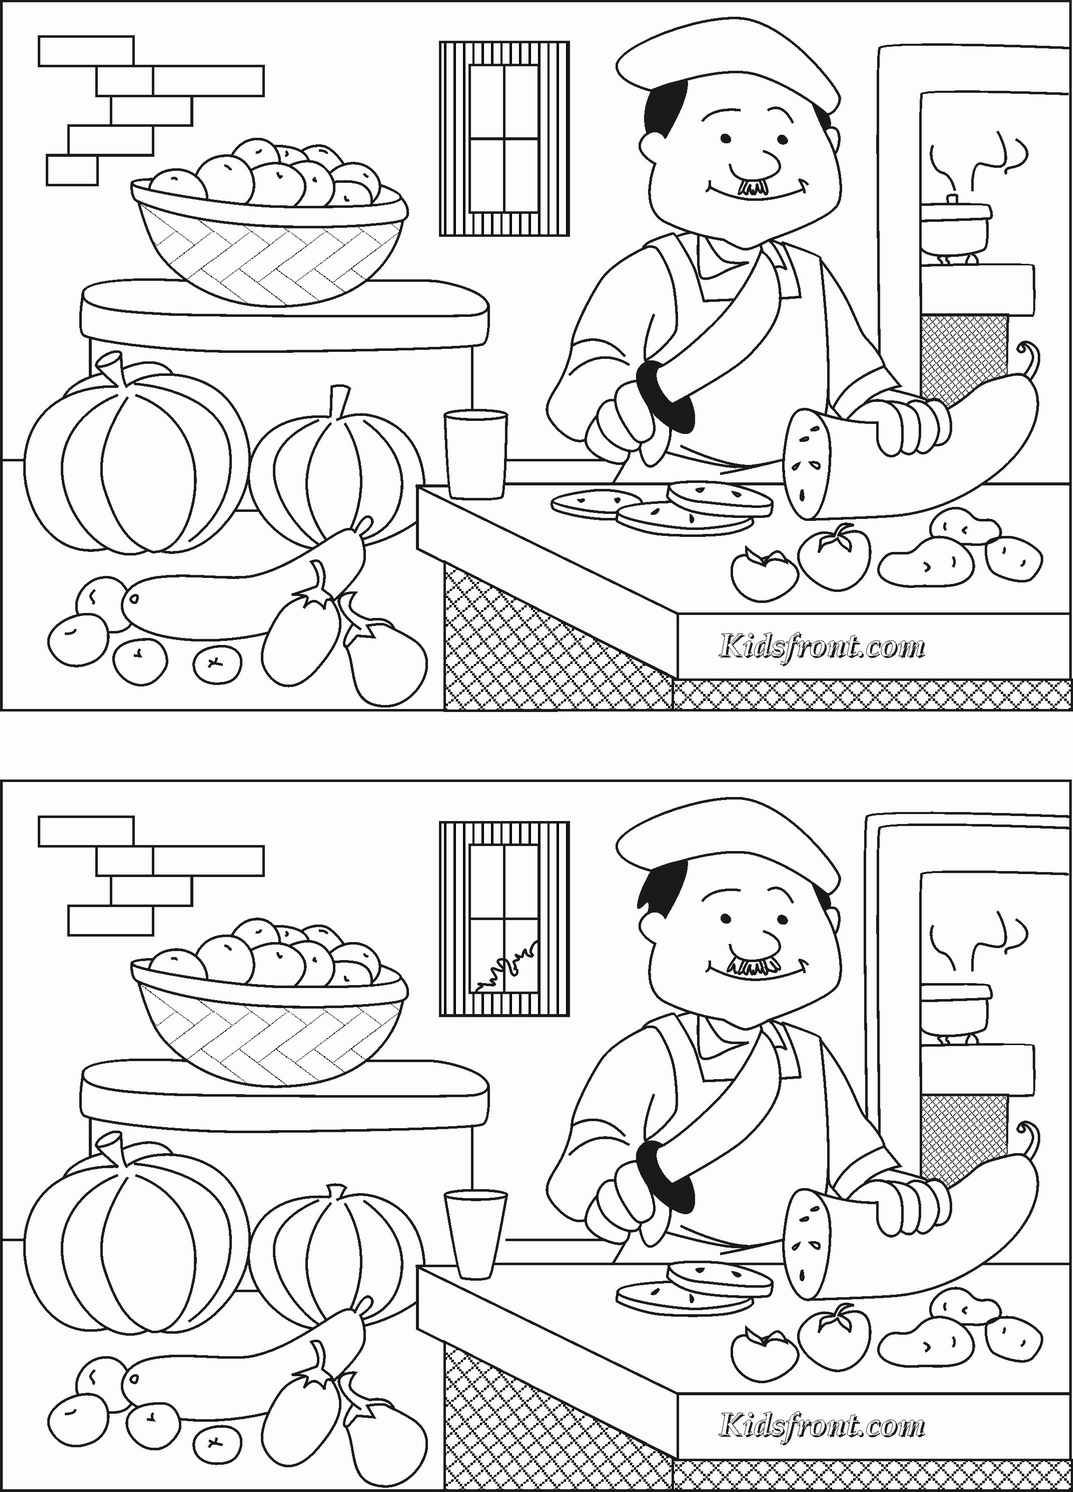 printable find the differences coloring page Activities for kids printable. find the differences miscellaneous 53